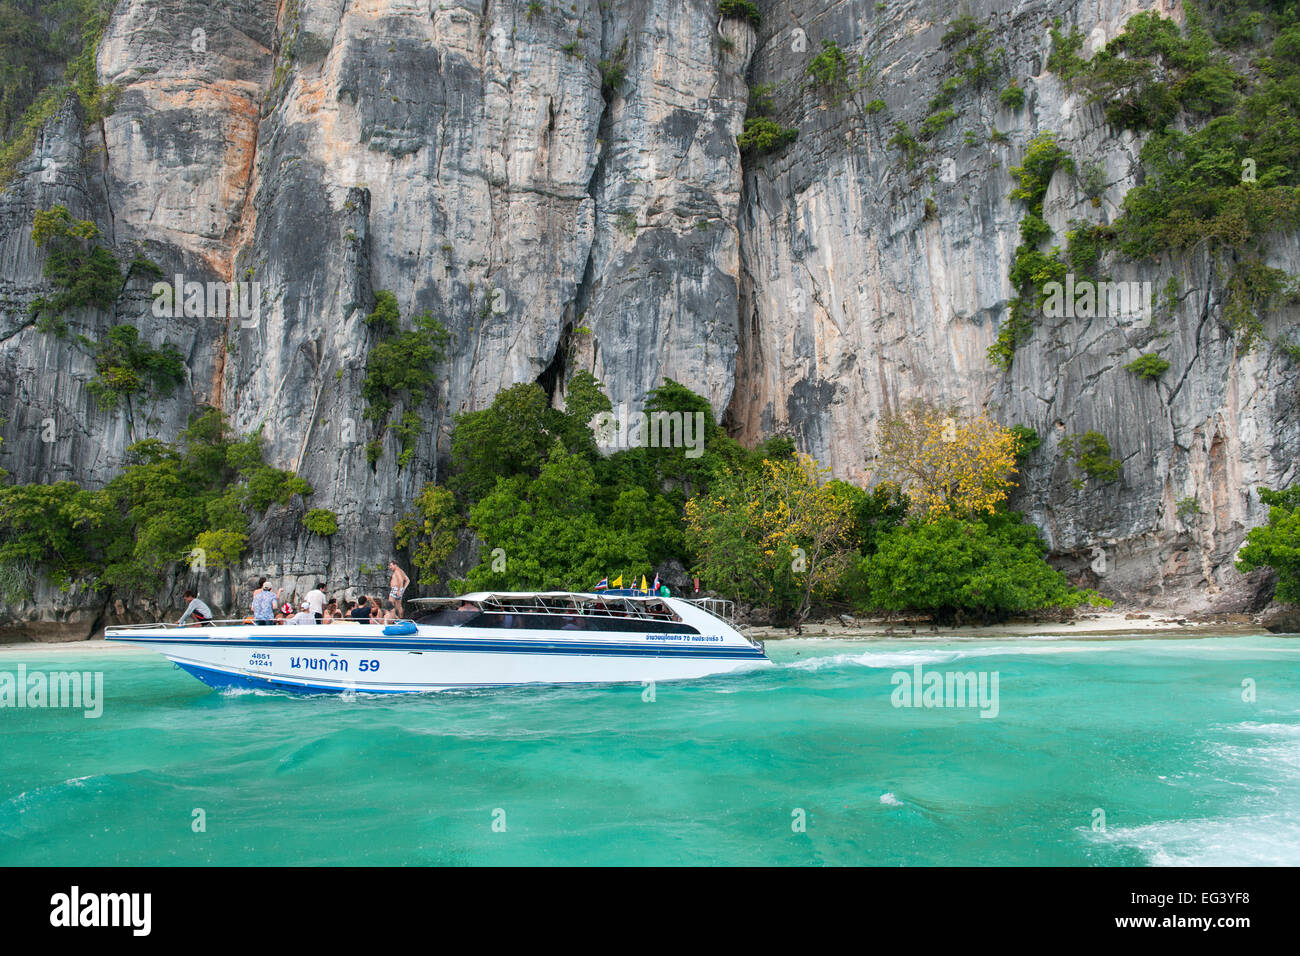 Tourist boat off the coast of Koh Phi Phi island in Thailand. Stock Photo